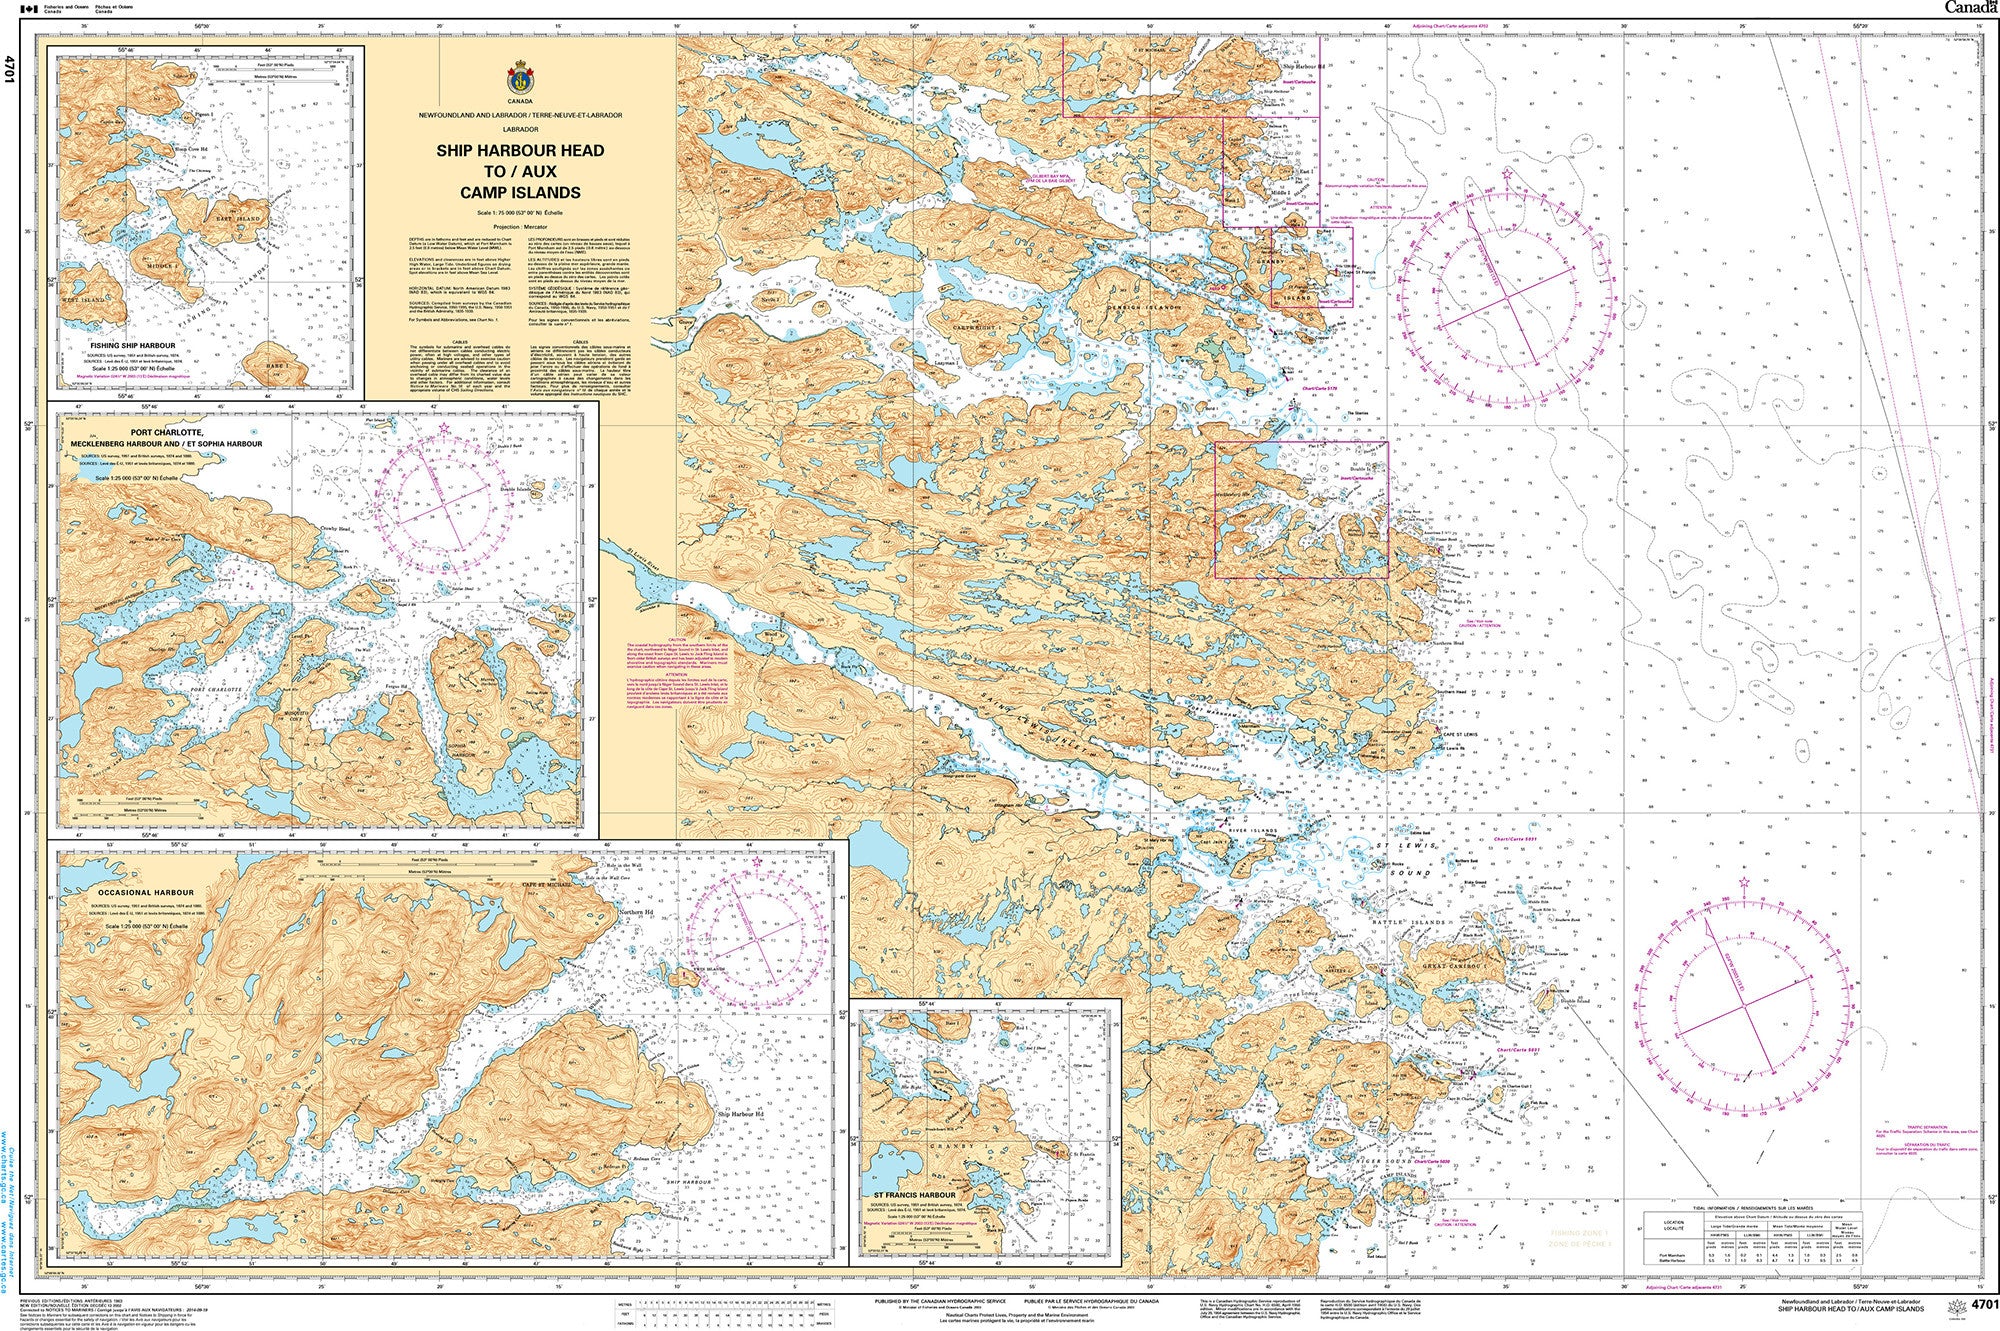 Canadian Hydrographic Service Nautical Chart CHS4701: Ship Harbour Head to/aux Camp Islands